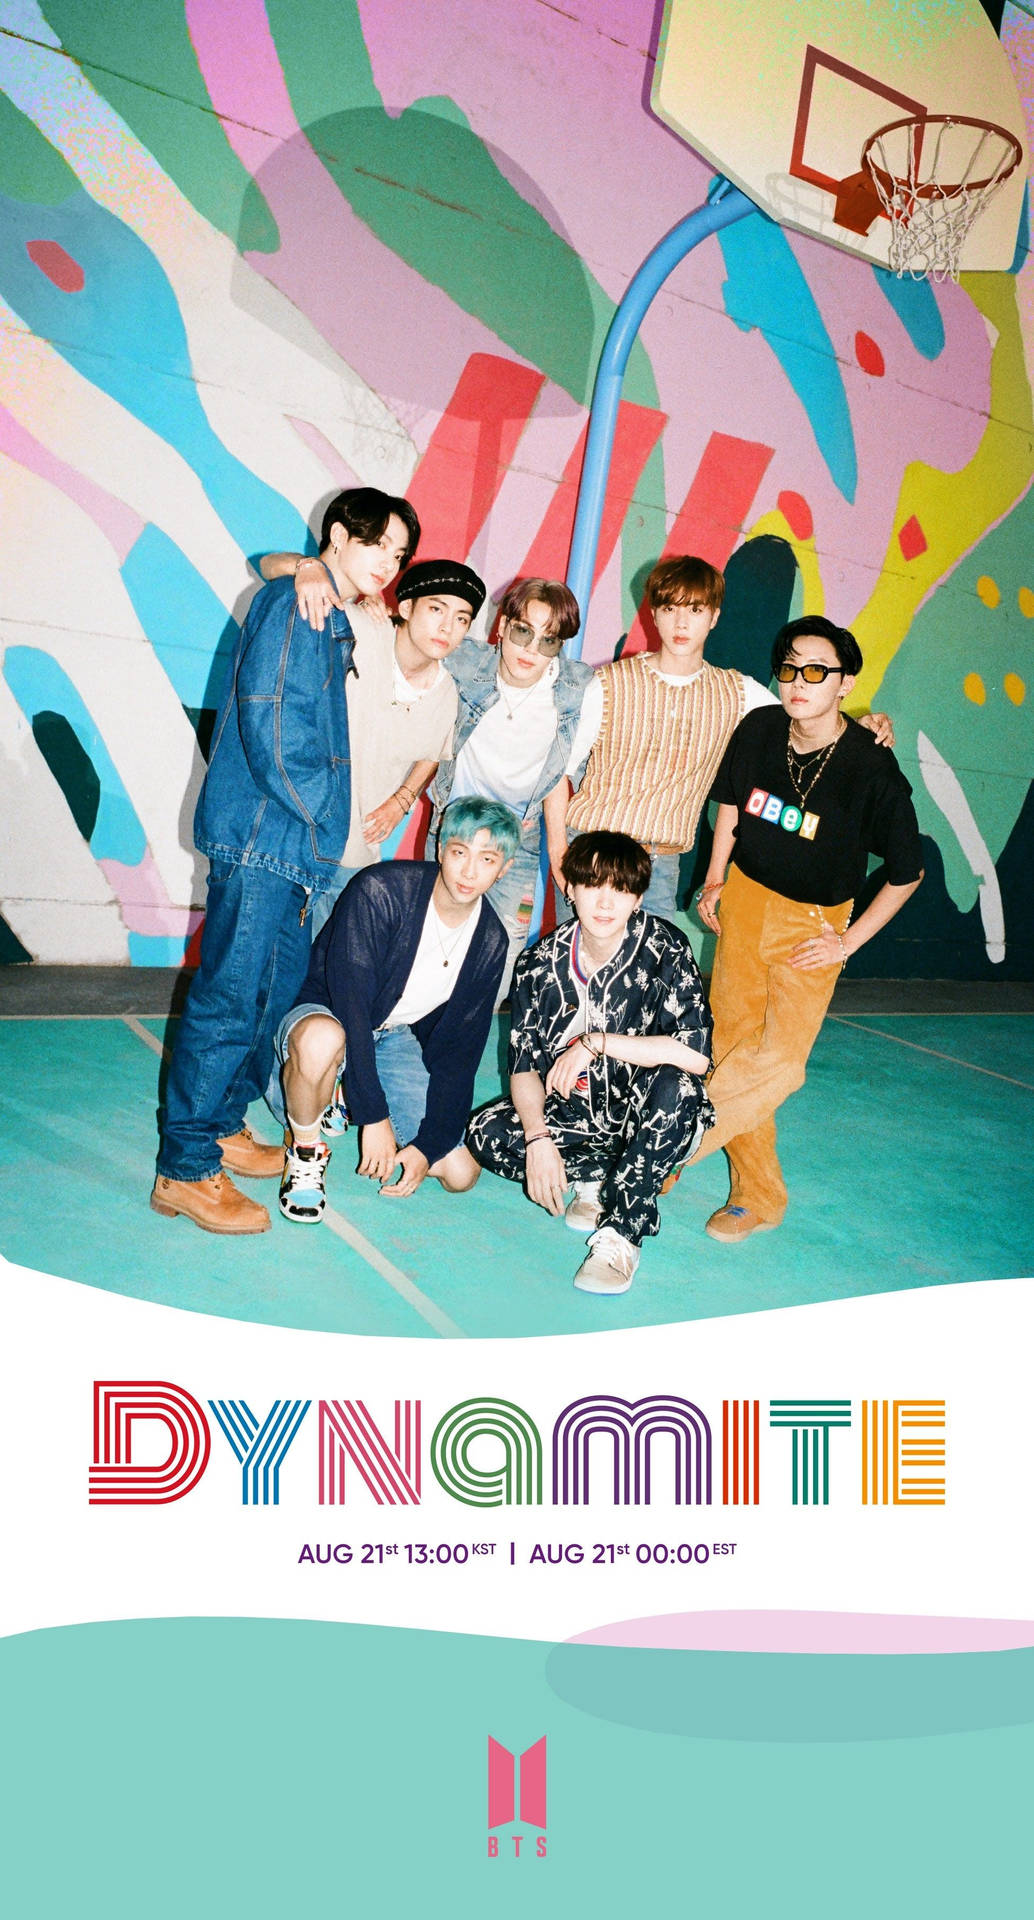 Bts Dynamite Official Release Date